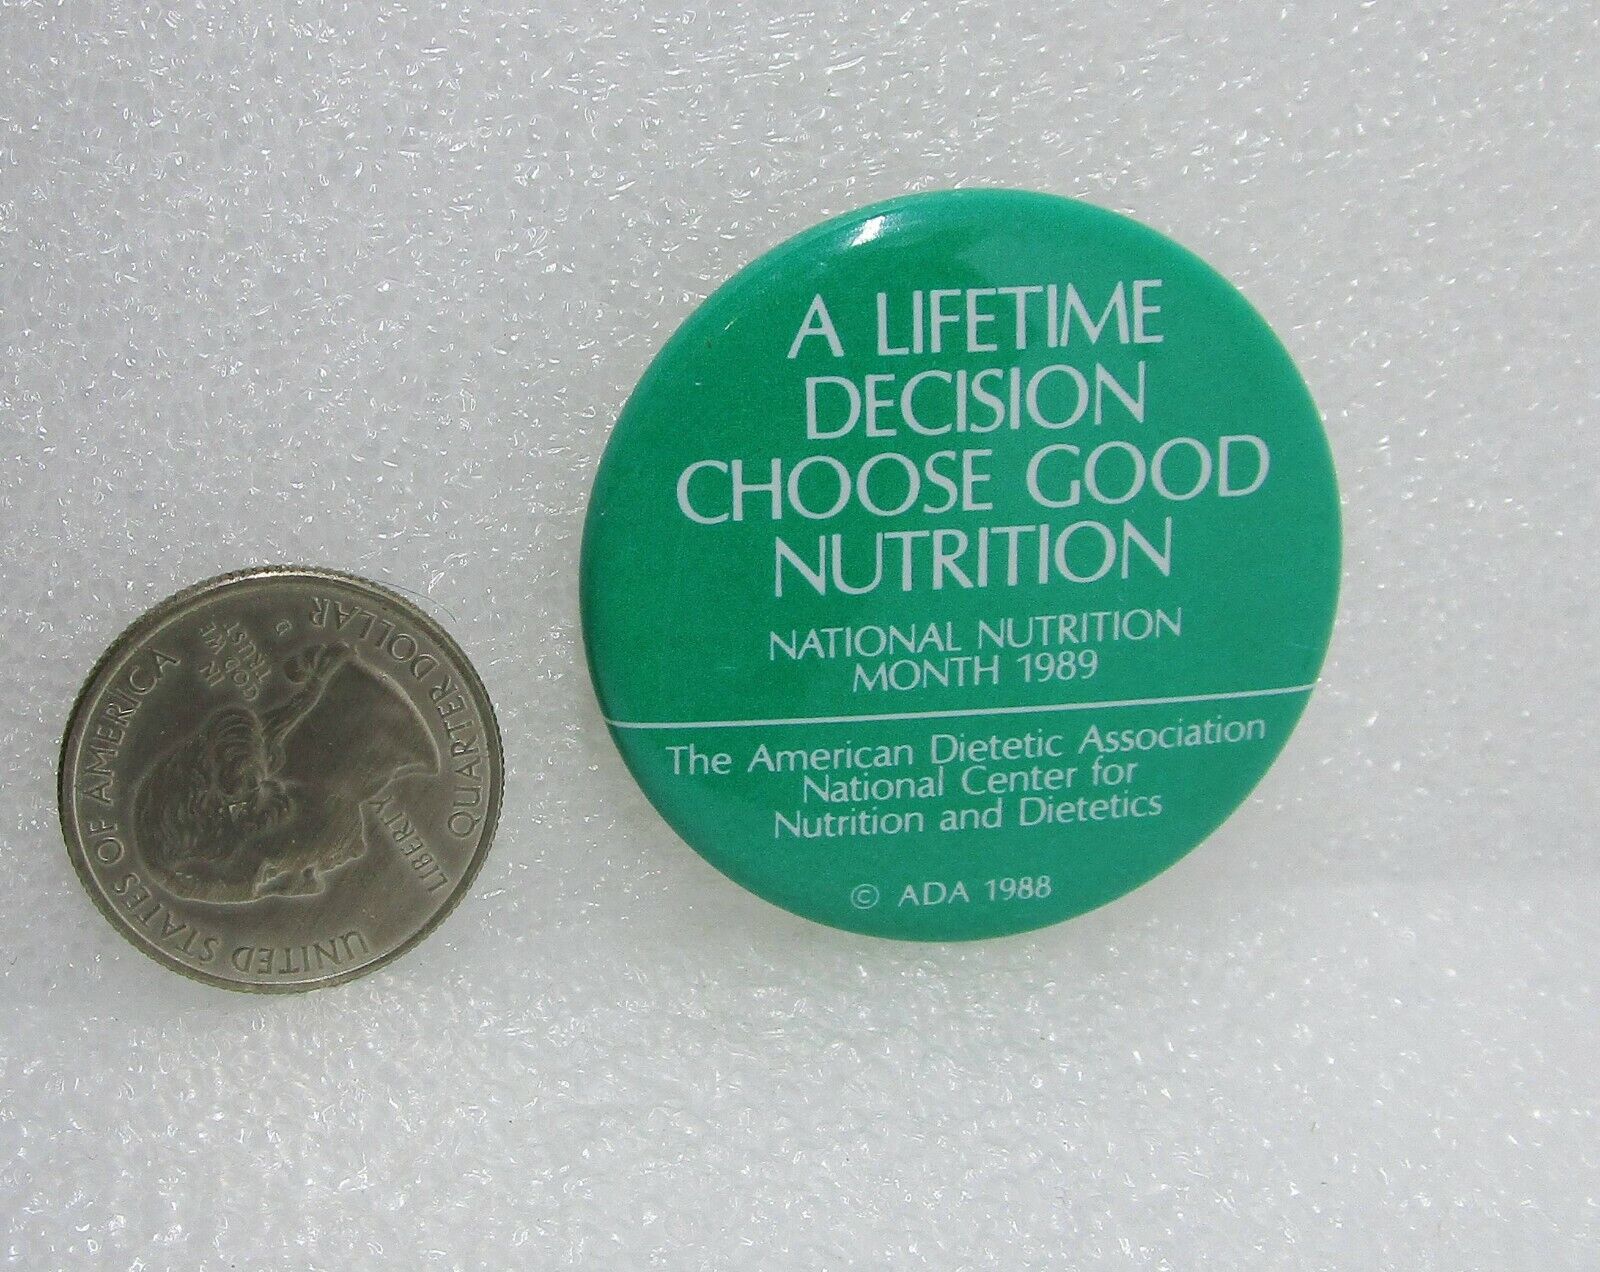 1989 National Nutrition Month - A Lifetime Decision Choose Good Nutrition Pin